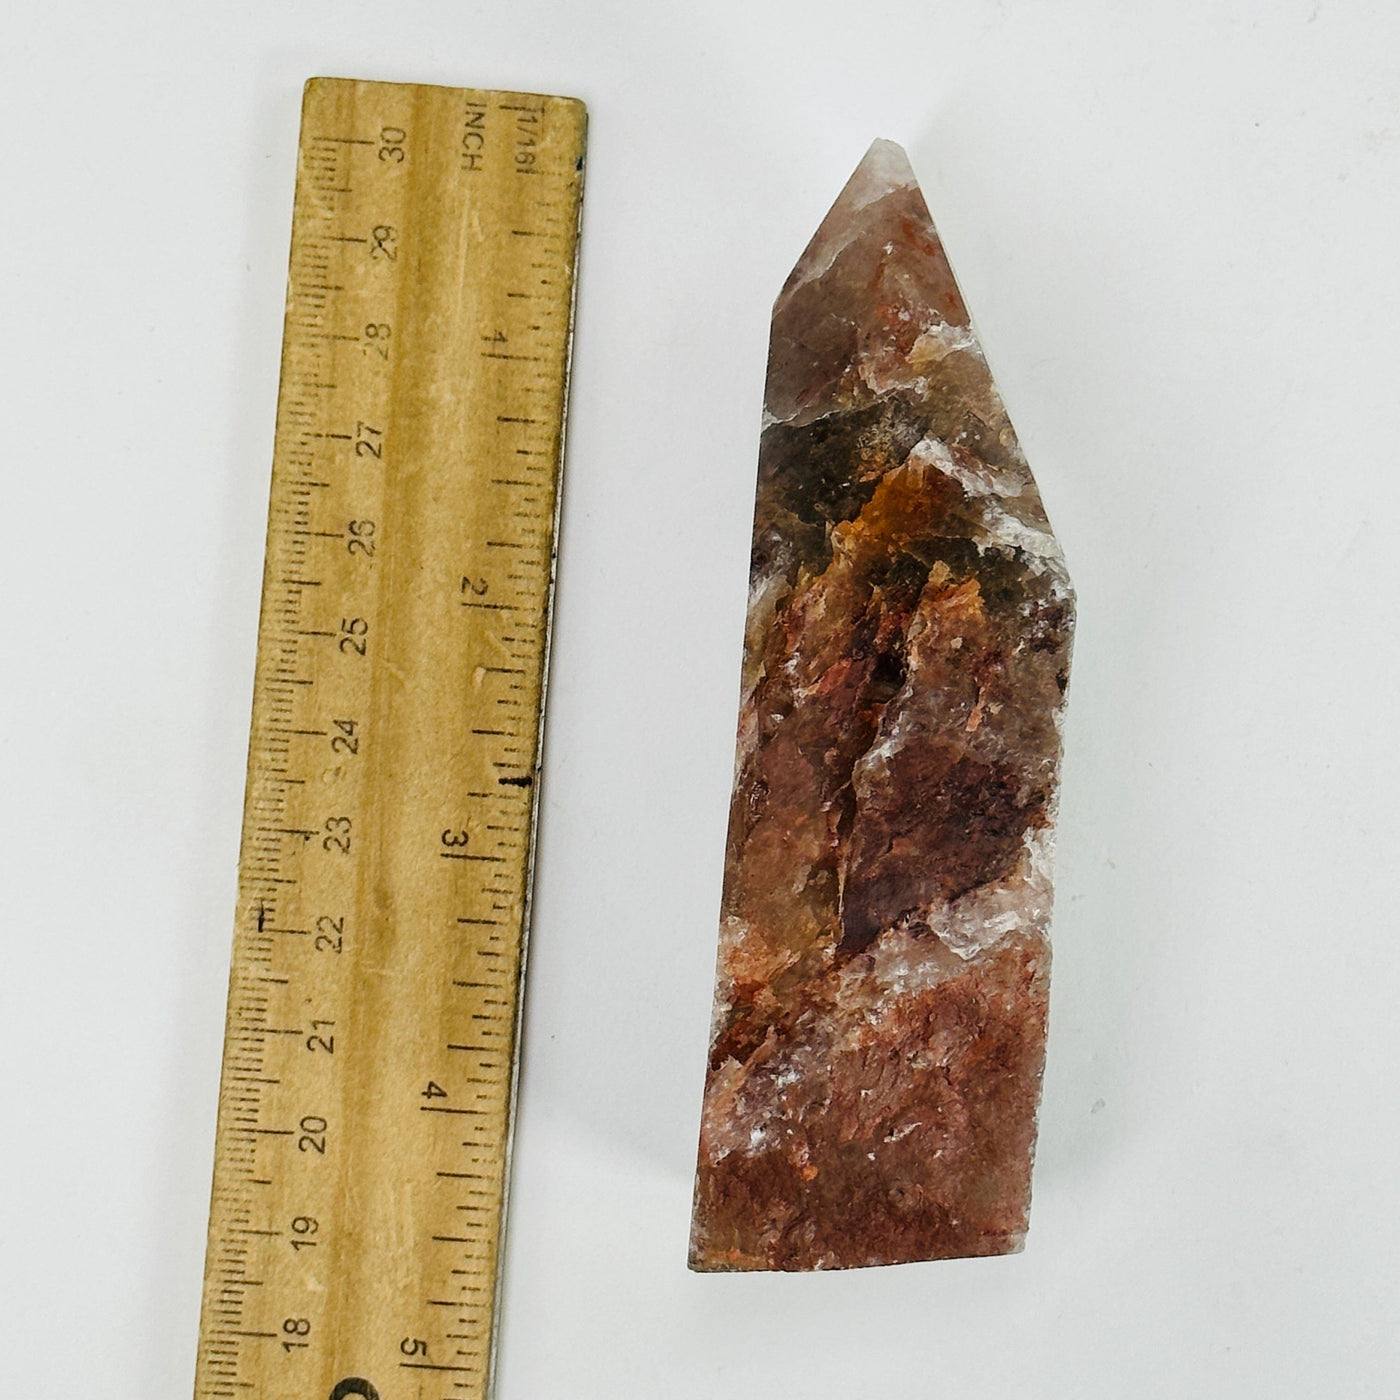 hematoid point next to a ruler for size reference